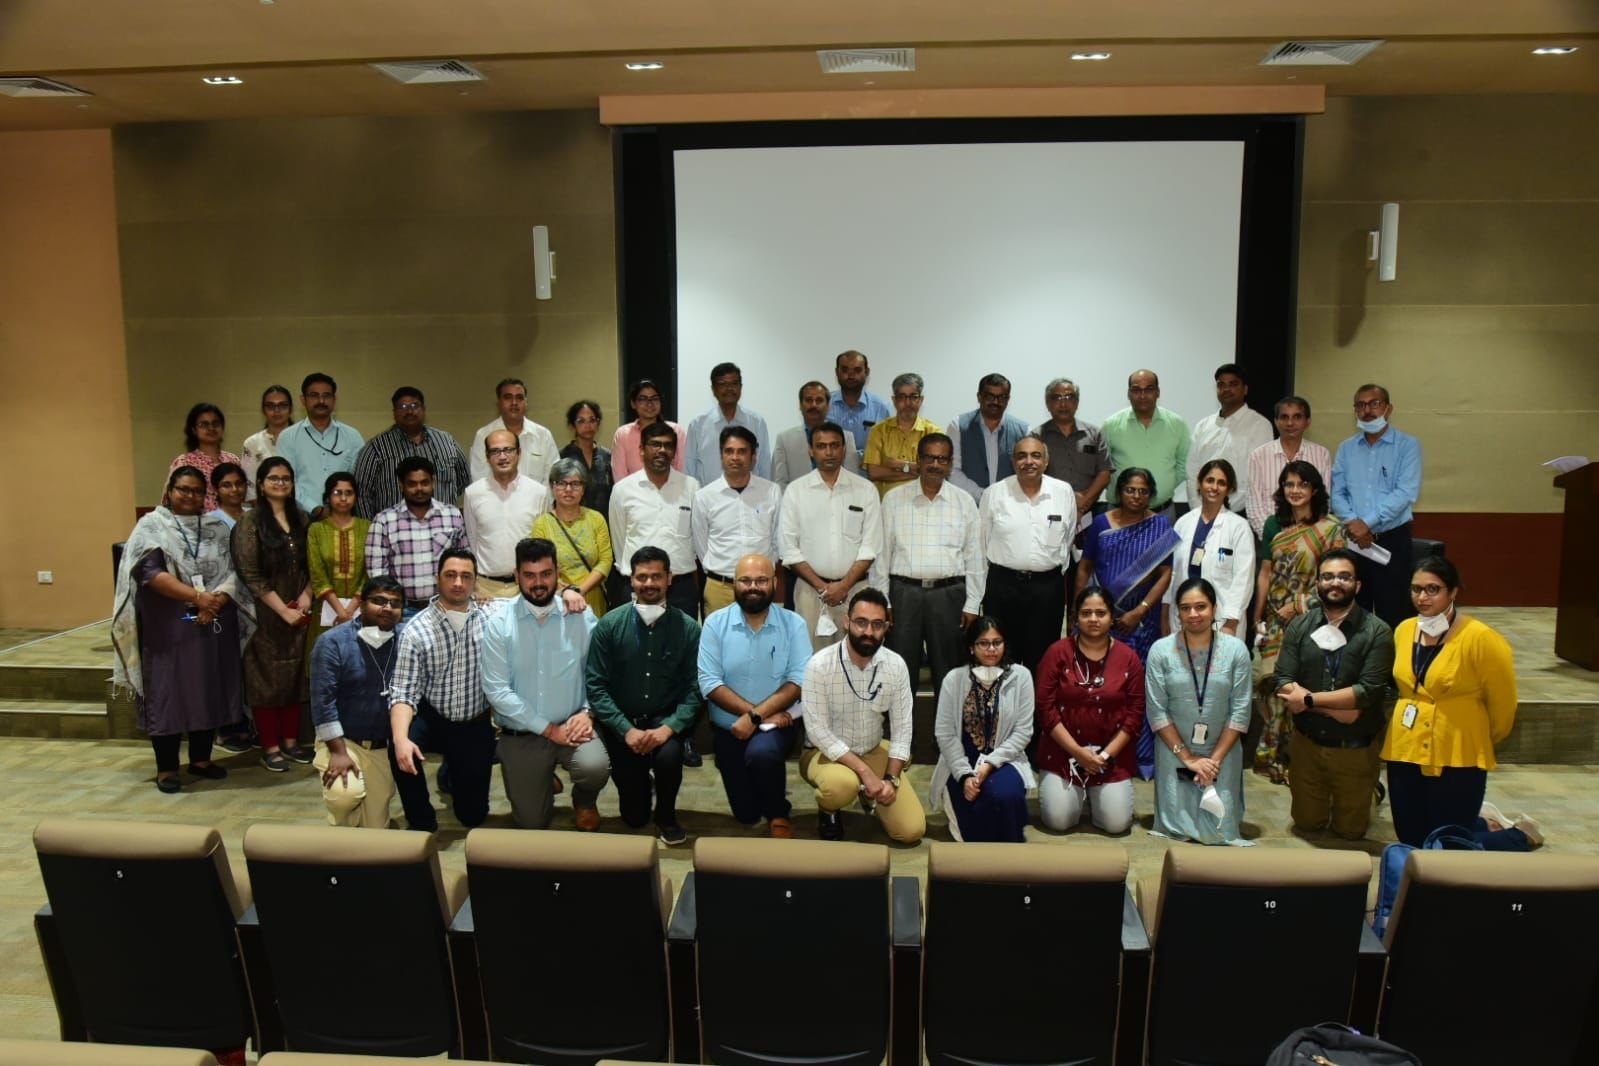 CHAVI – India’s first Oncology Image Bank Launched to Accelerate Collaborative Cancer Research